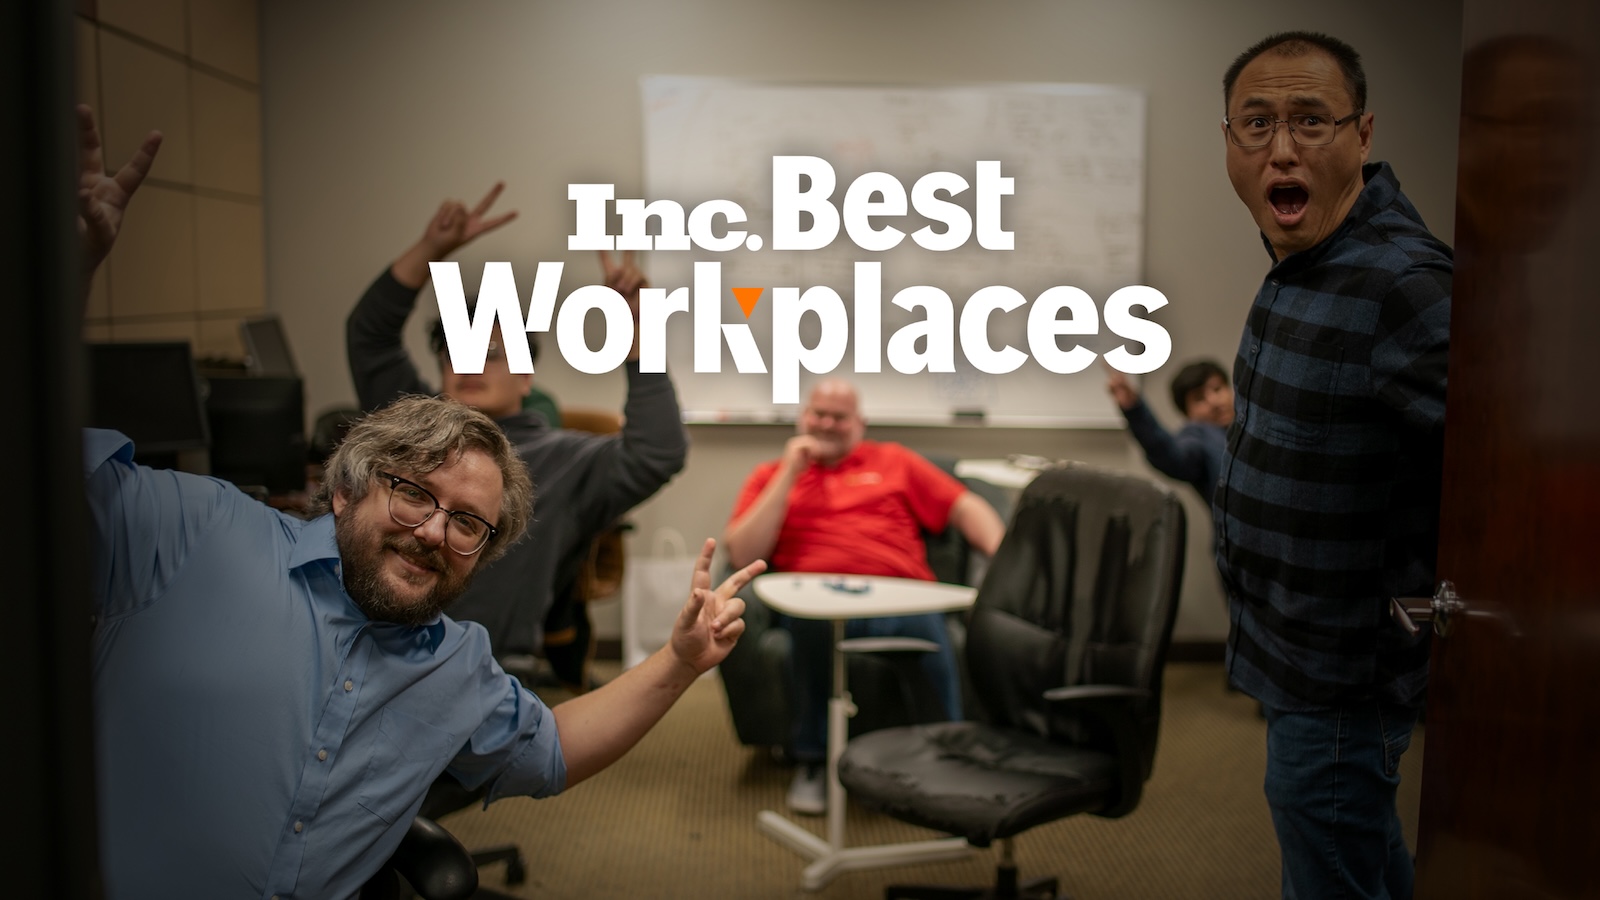 Three Pointers posing having fun in an office with the Inc. Best Workplaces logo in the foreground.